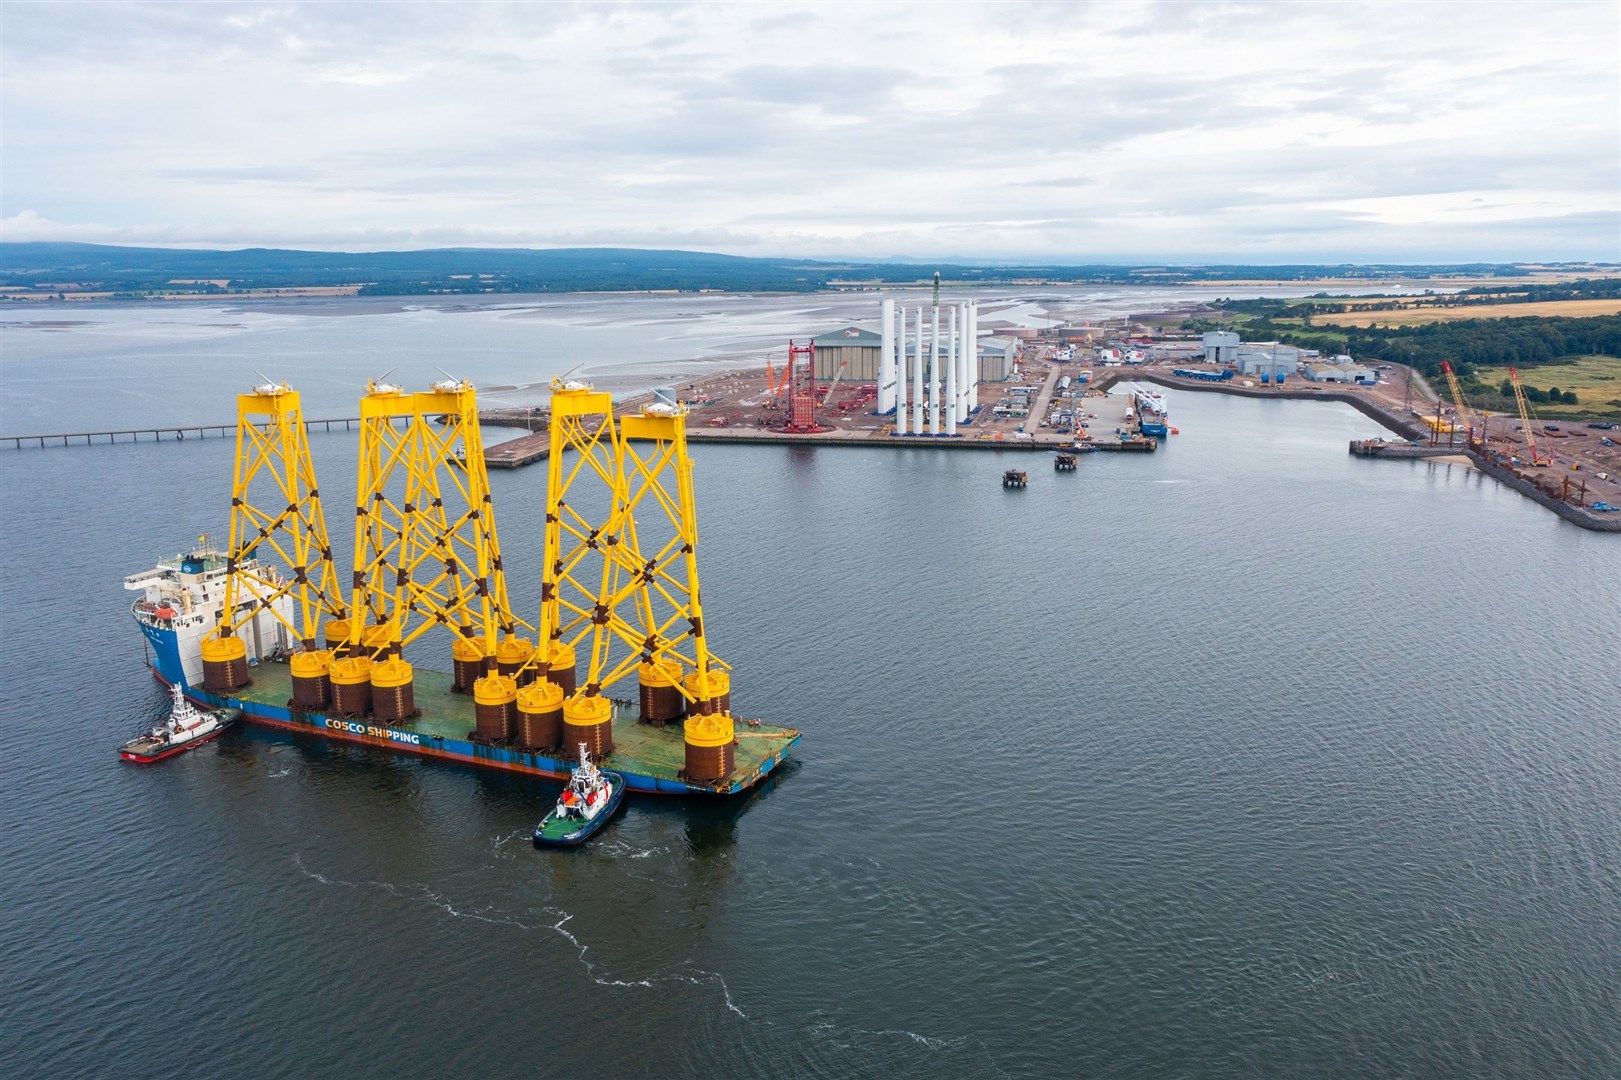 The first jacket superstructures for the Seagreen offshore wind farm arrive at Port of Nigg in the Cromarty Firth. Picture credit: Seagreen Offshore Wind Farm